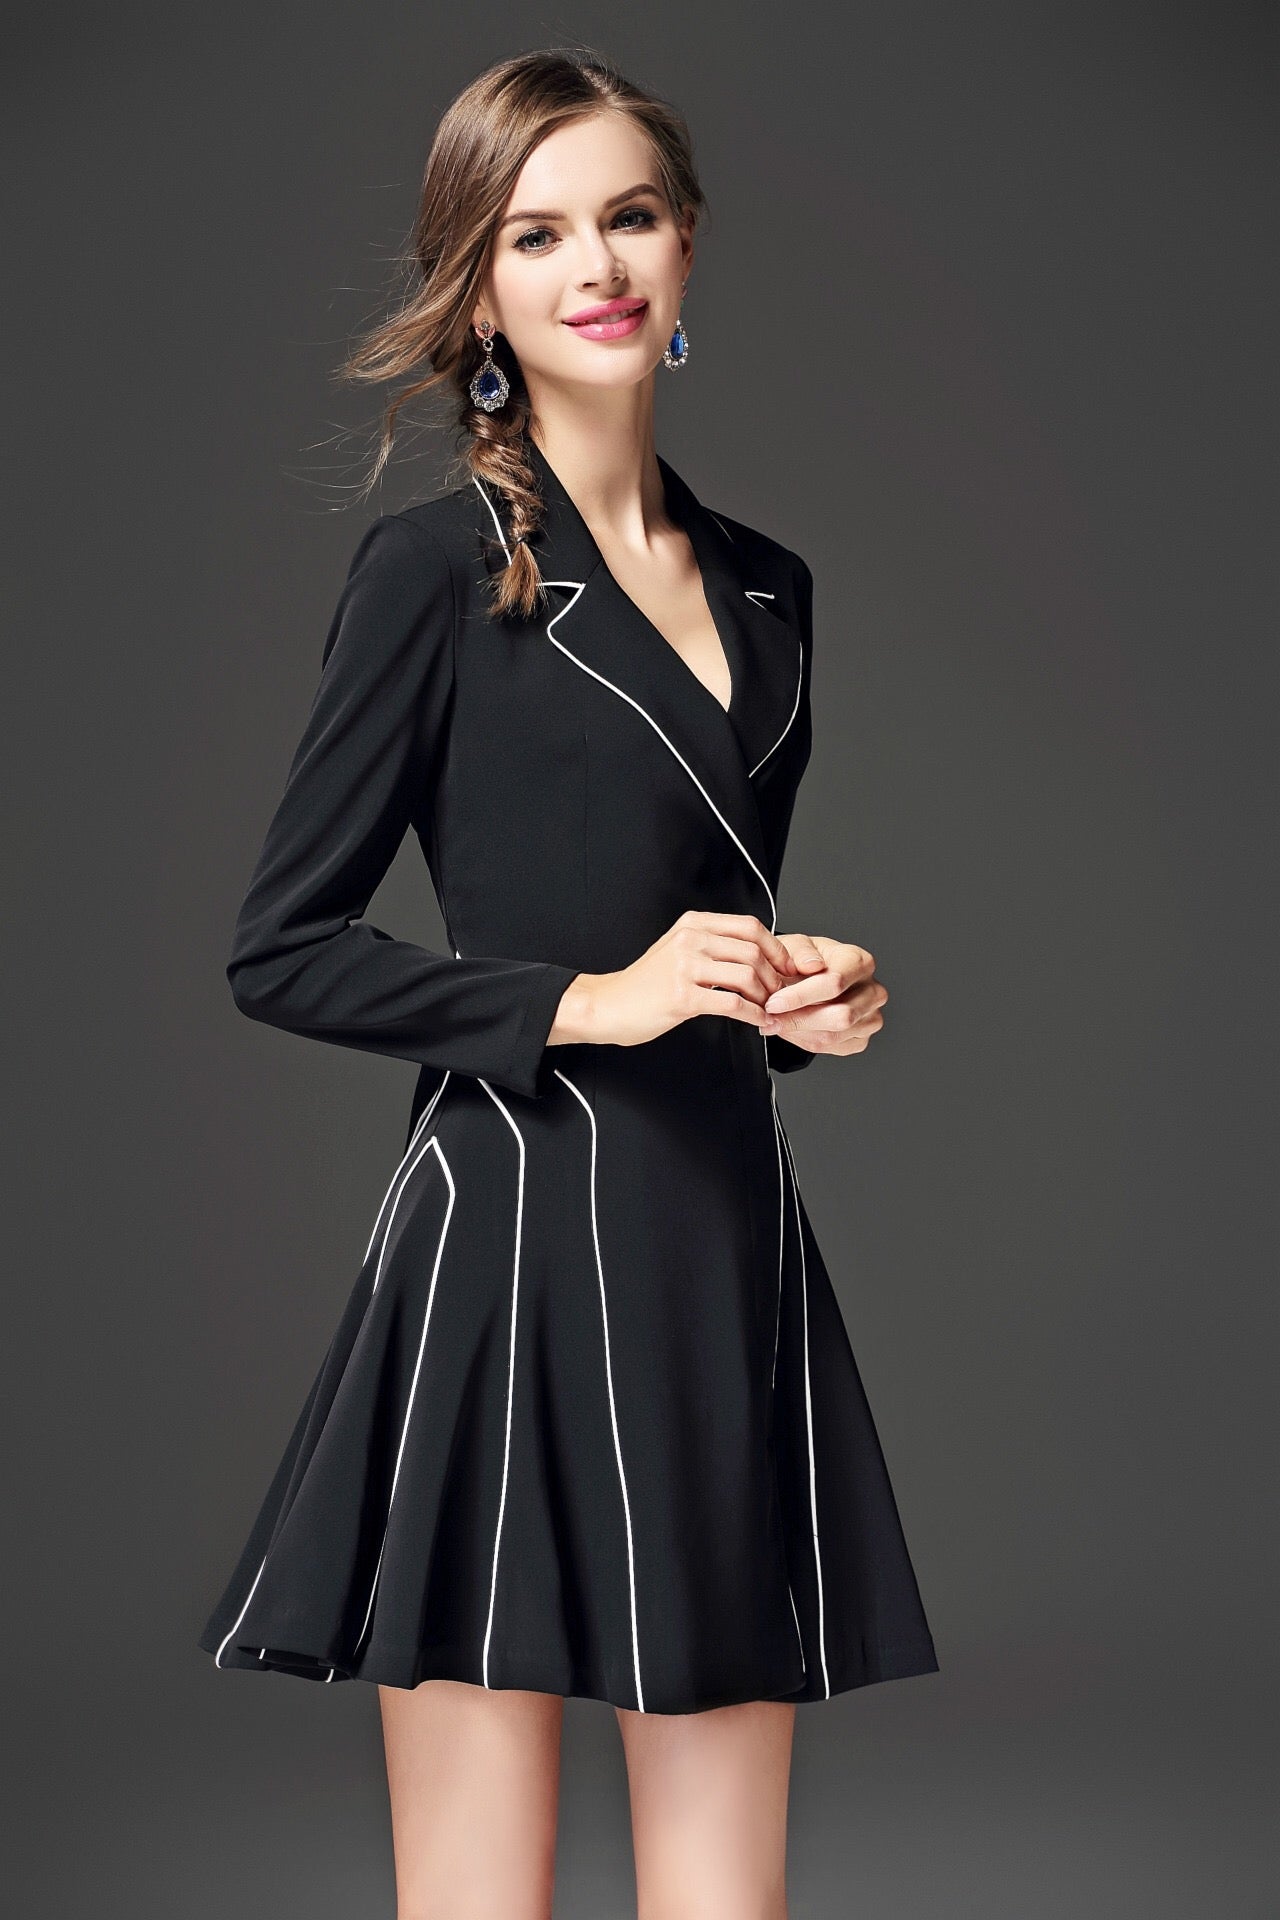 Black Long Sleeve Work Dress With White Piping | Dress Album